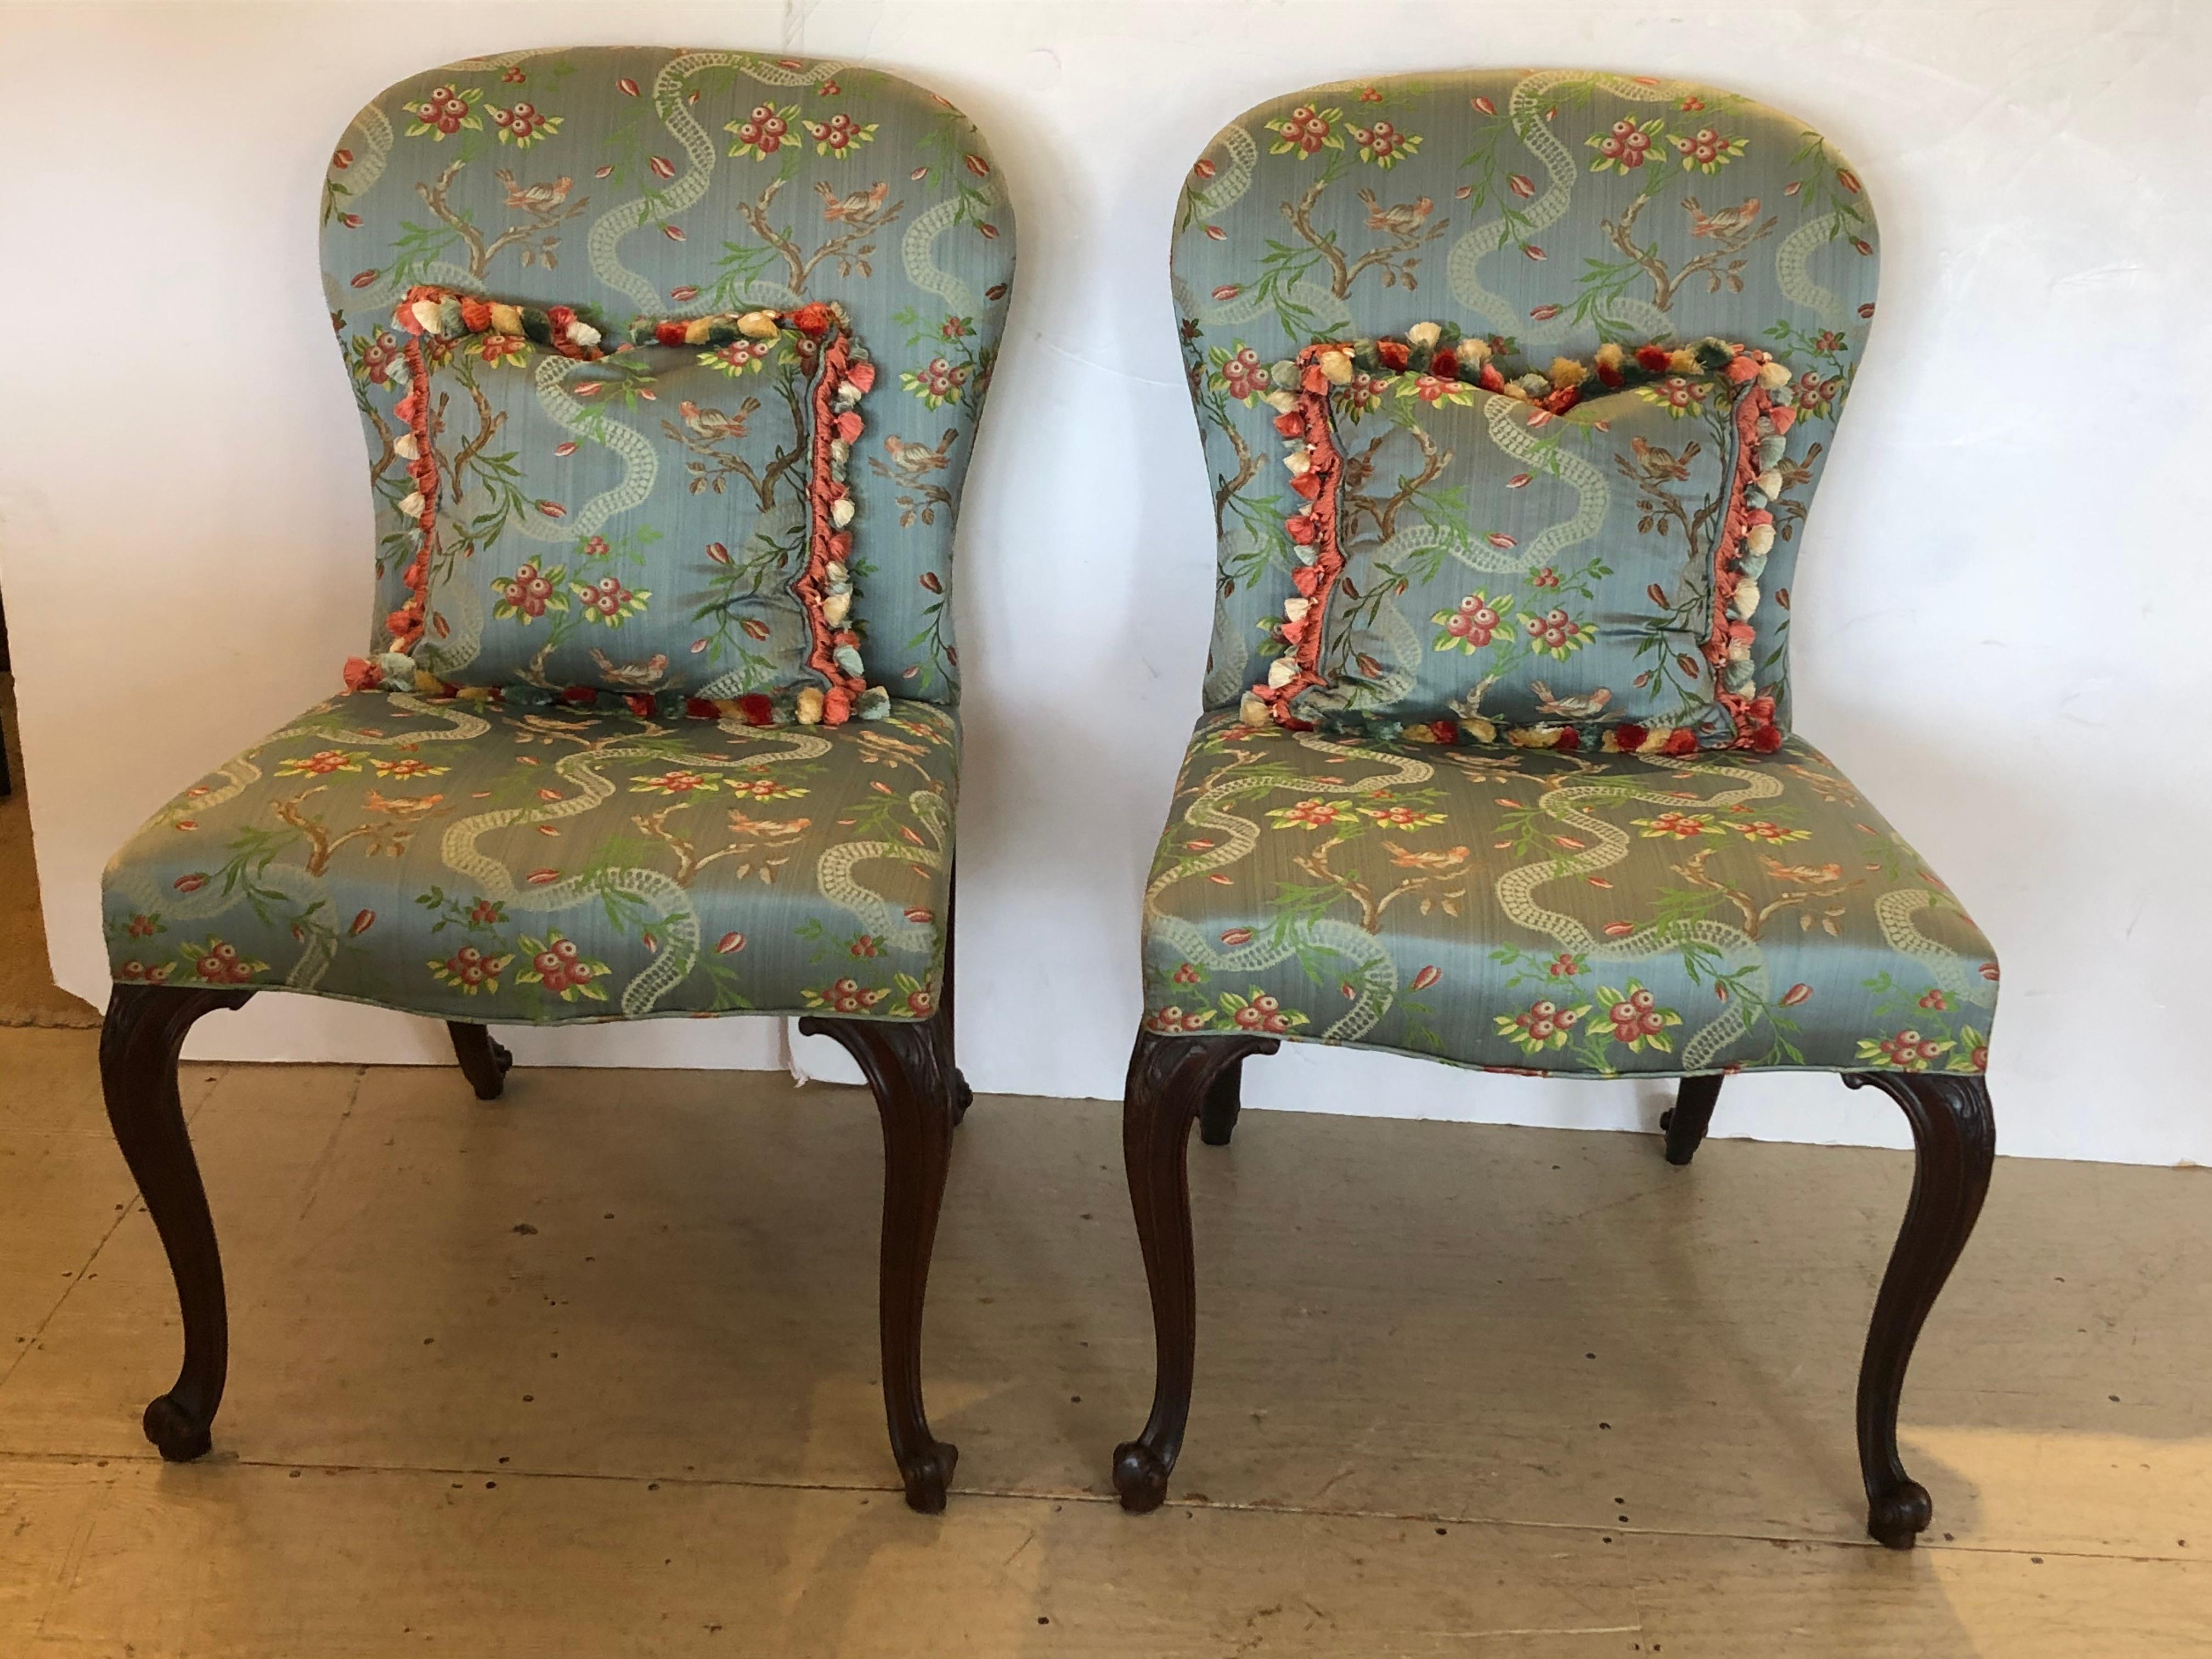 Superbly elegant pair of Georgian 18th century side chairs having mahogany cabriole legs terminating in snail shaped feet, horsehair stuffing in the seat, and more recent sumptuous Scalamandre silk upholstery with foliage and birds. Custom pillows